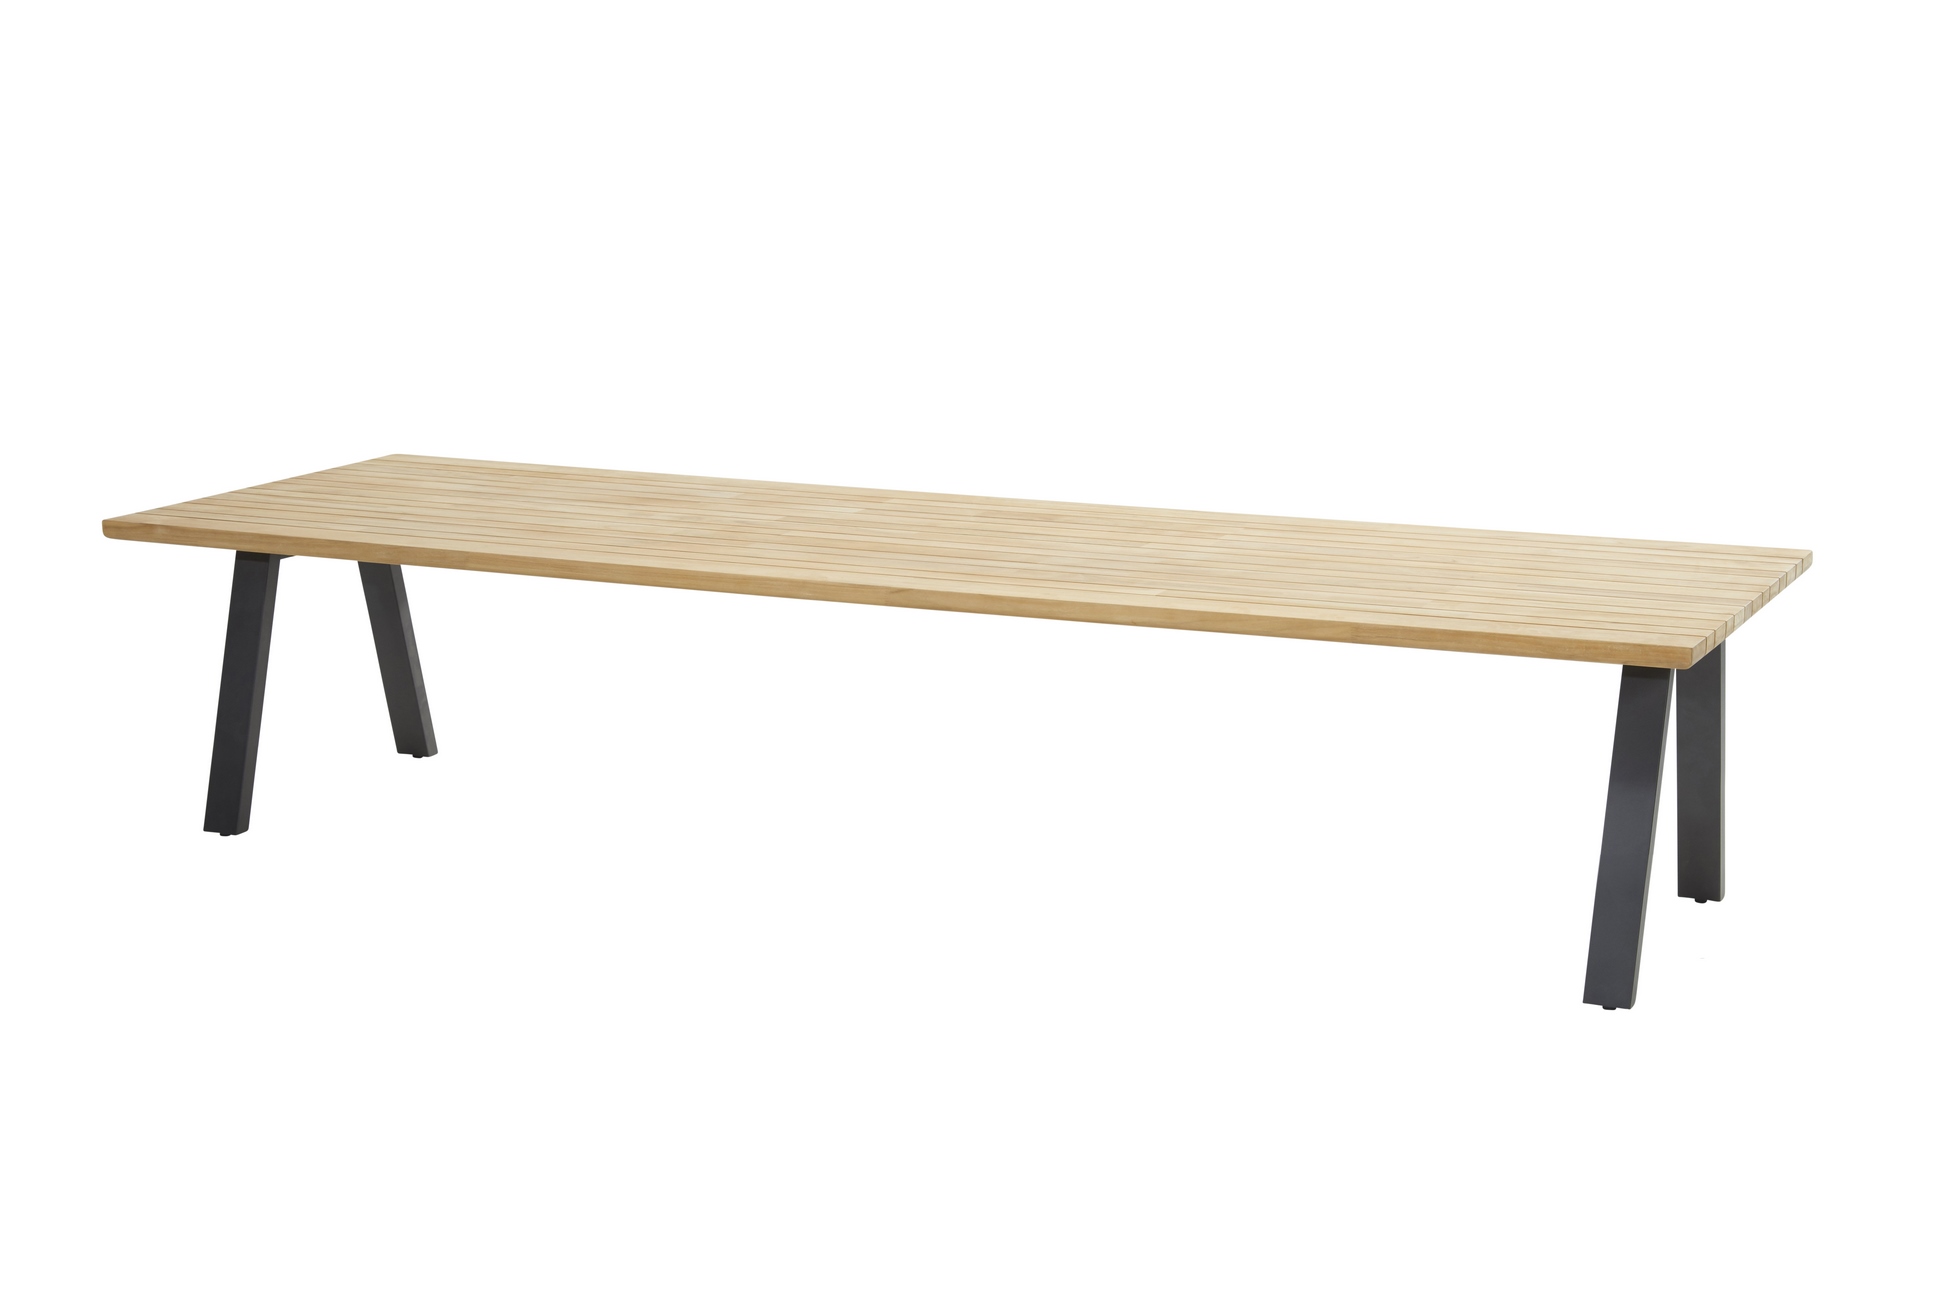 91447-91448__Ambassador_low_dining_table_natural_teak_280x100cm_with_Anthracite_legs_01.jpg